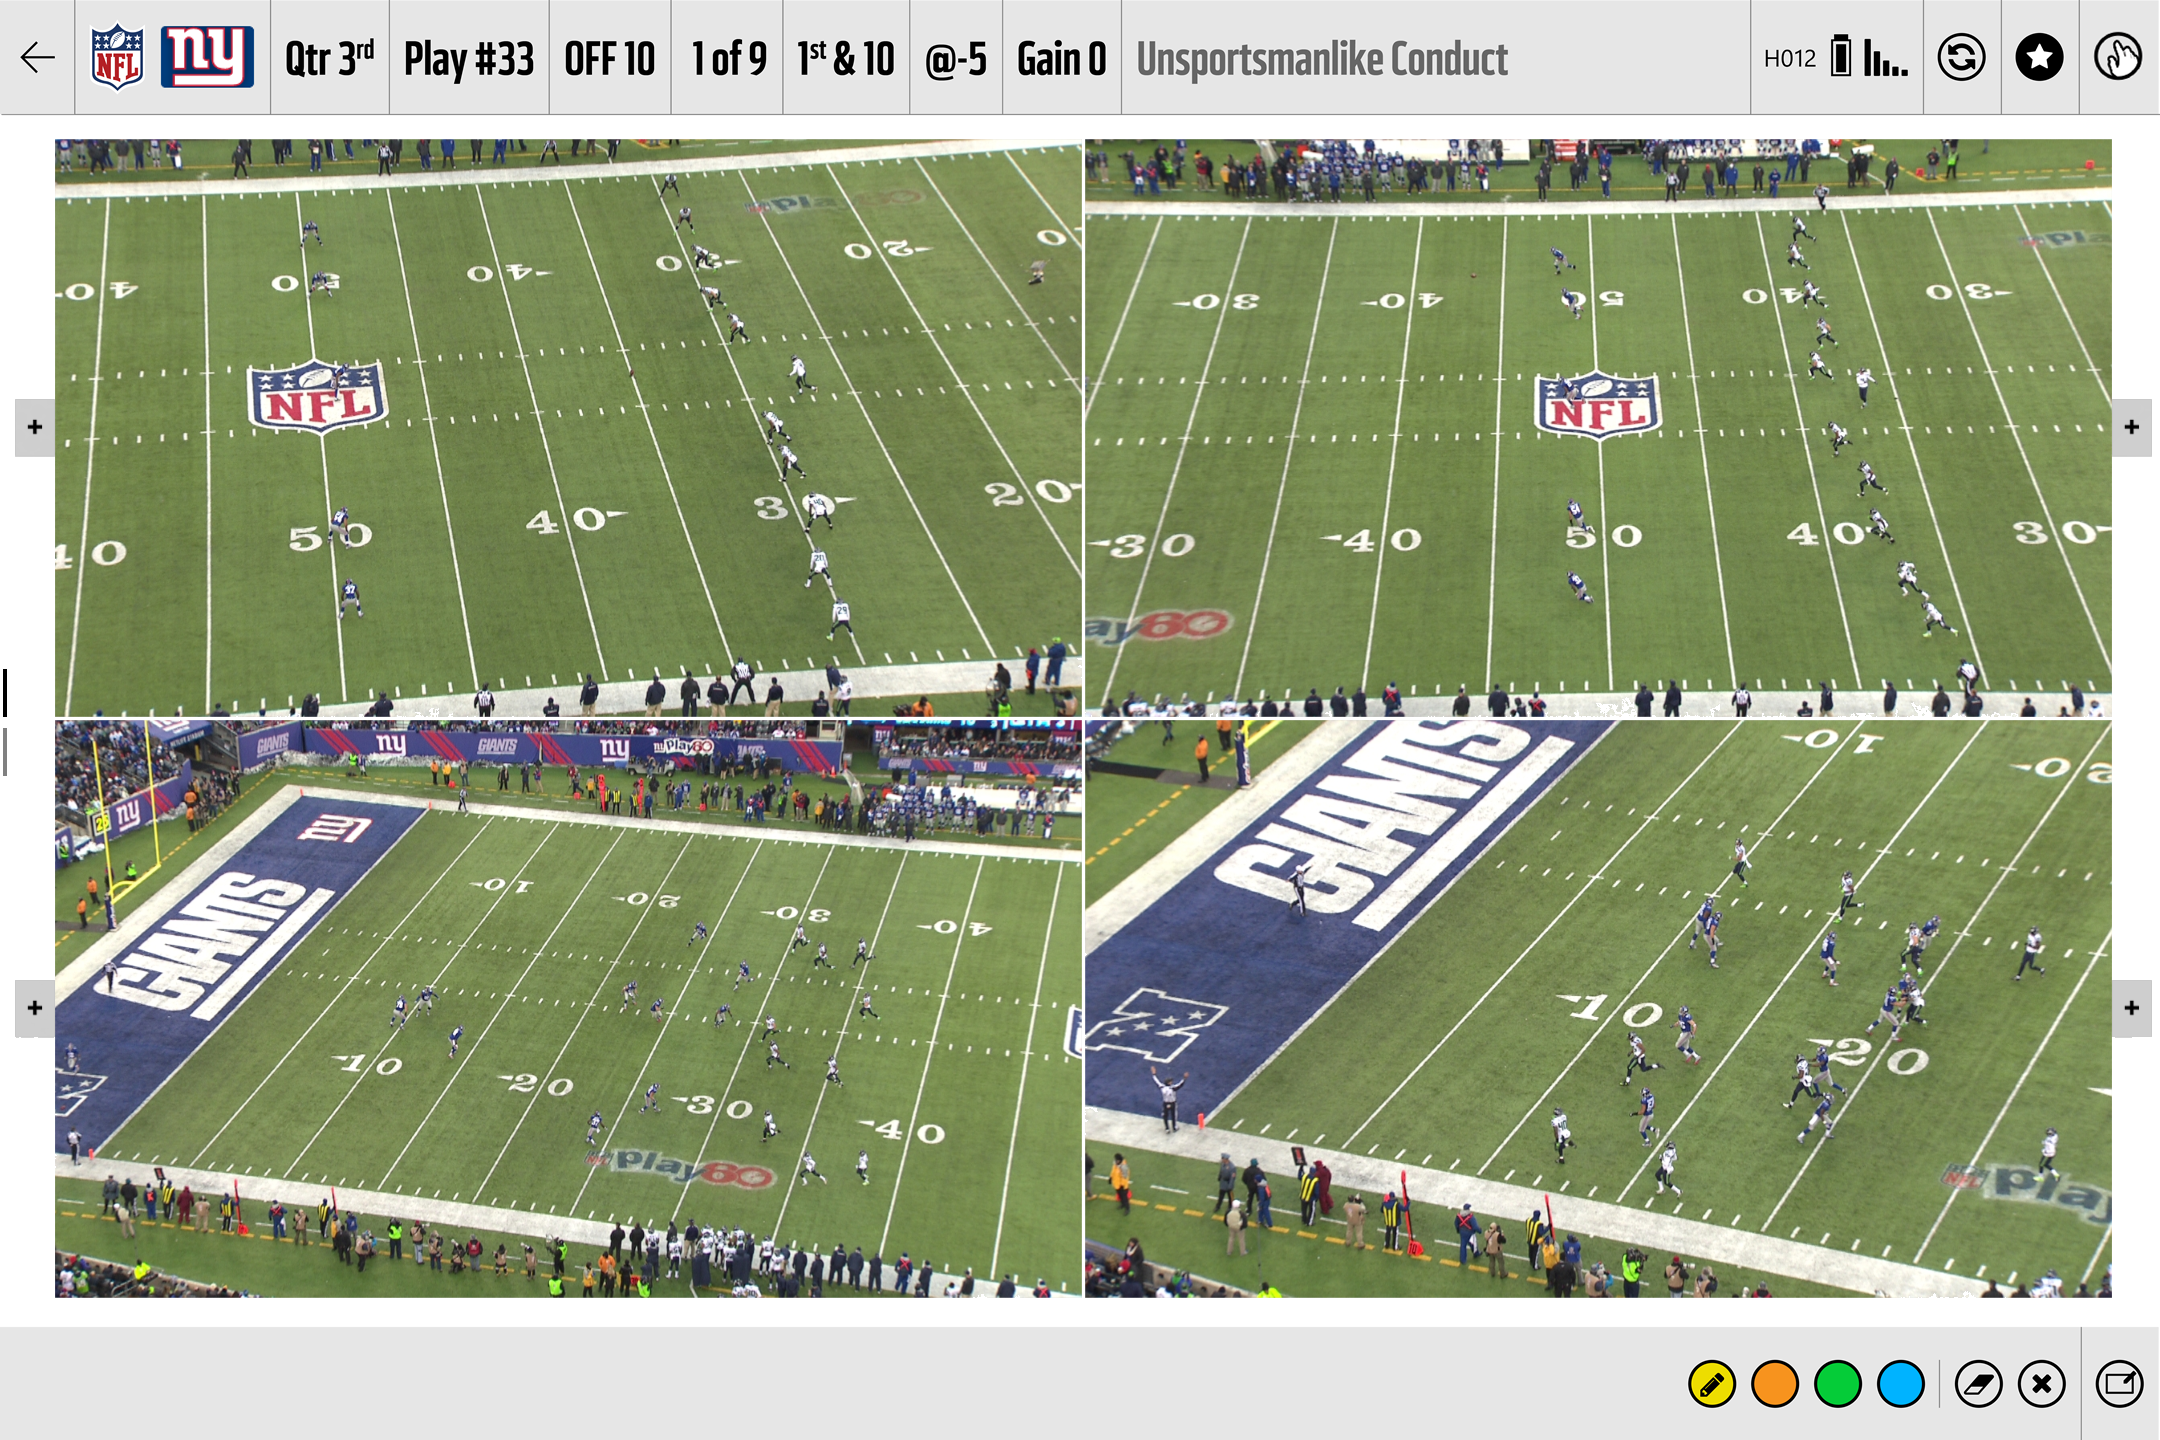 Four split screen showing plays on a football field